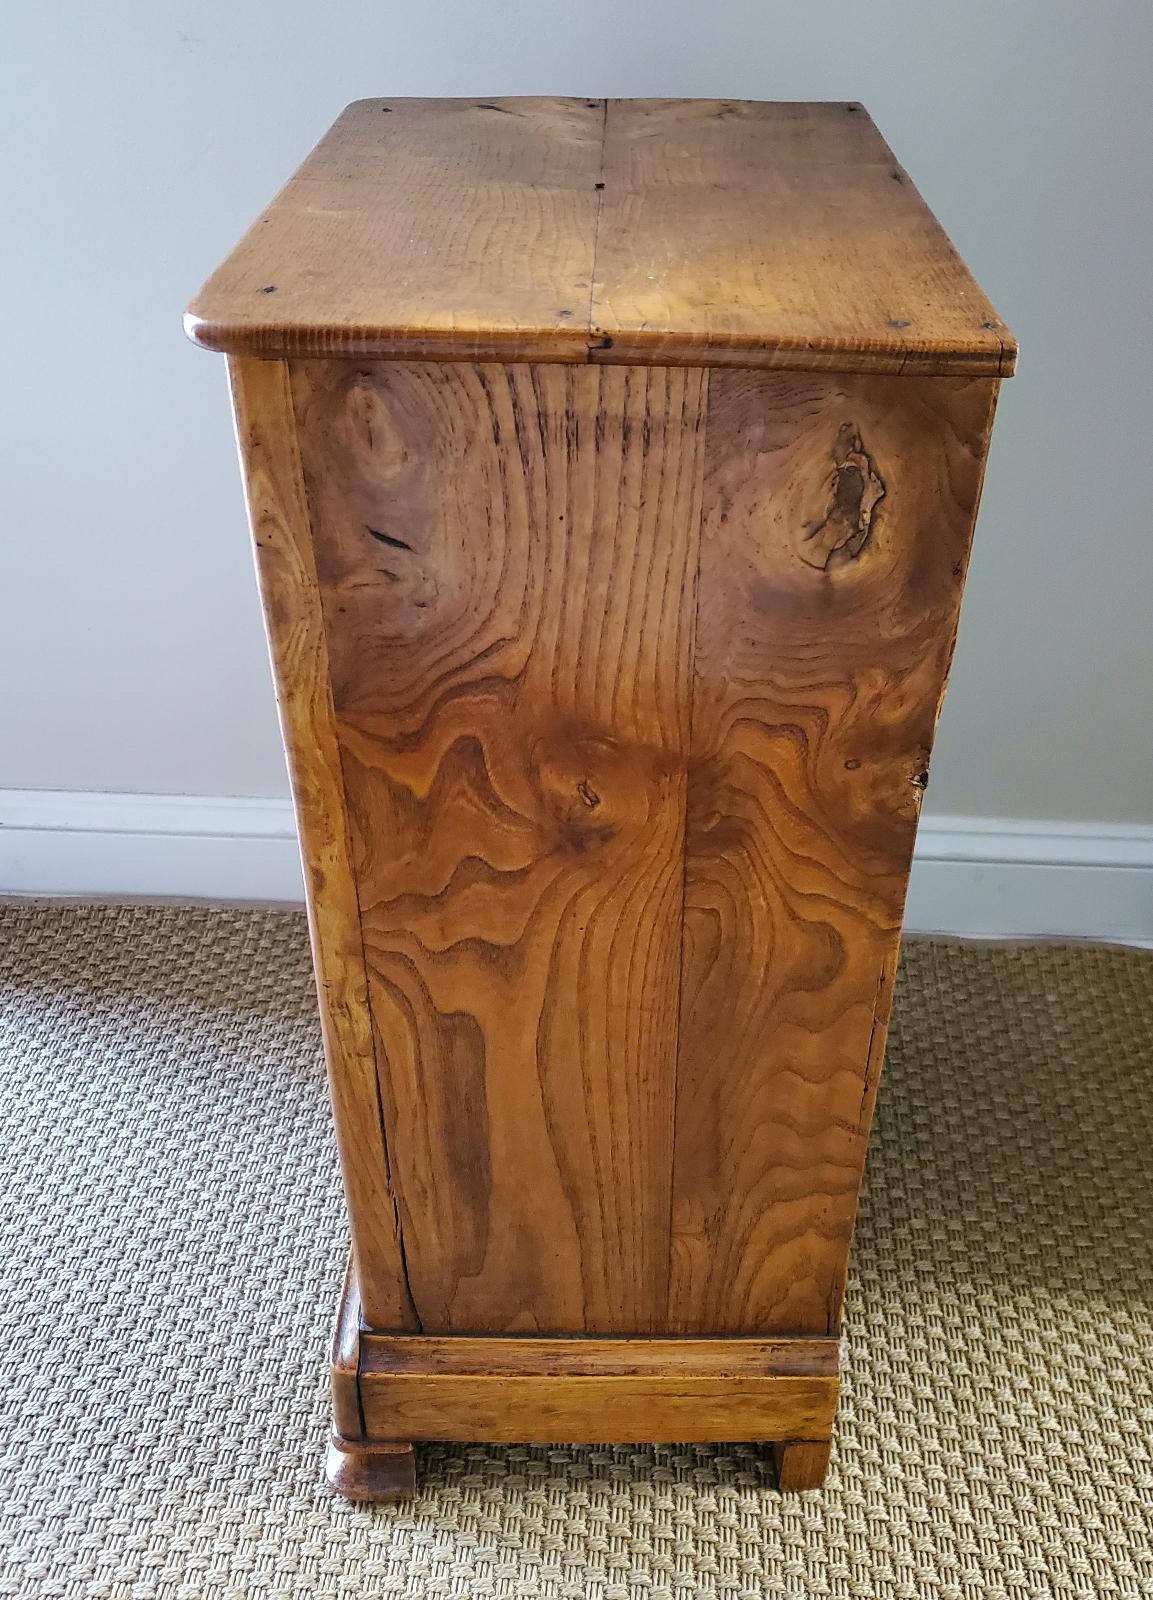 Early 19th Century French Provincial nightstand. Made of “Book Matched” burled ash with a deep color and original patination. Single drawer and cupboard. Loire Valley, circa 1820. Measures: 29.5” H 16” W 11.5” D.
 